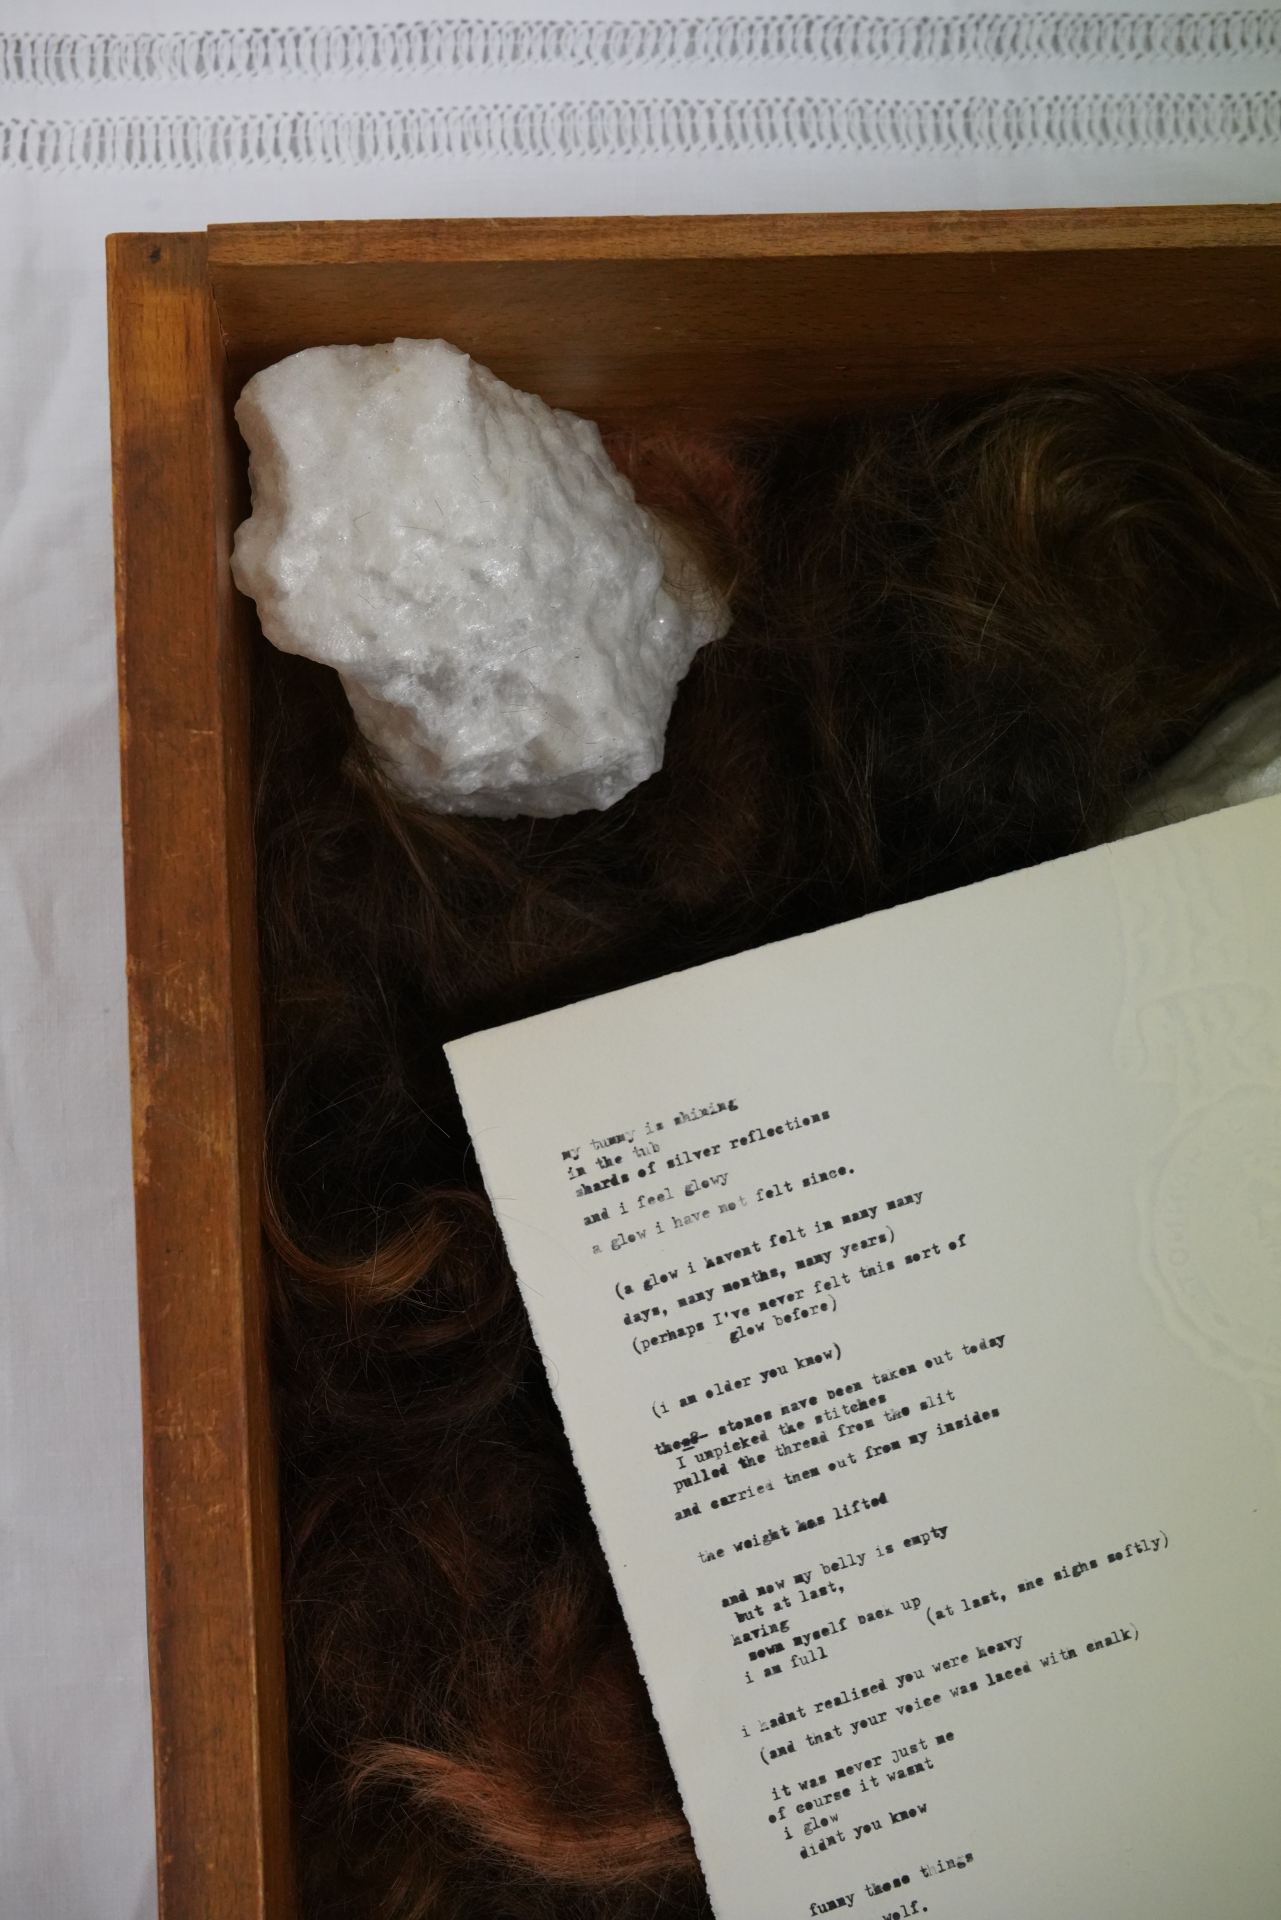 A bird's eye view of a box containing 3D printed stones and a handwritten note.